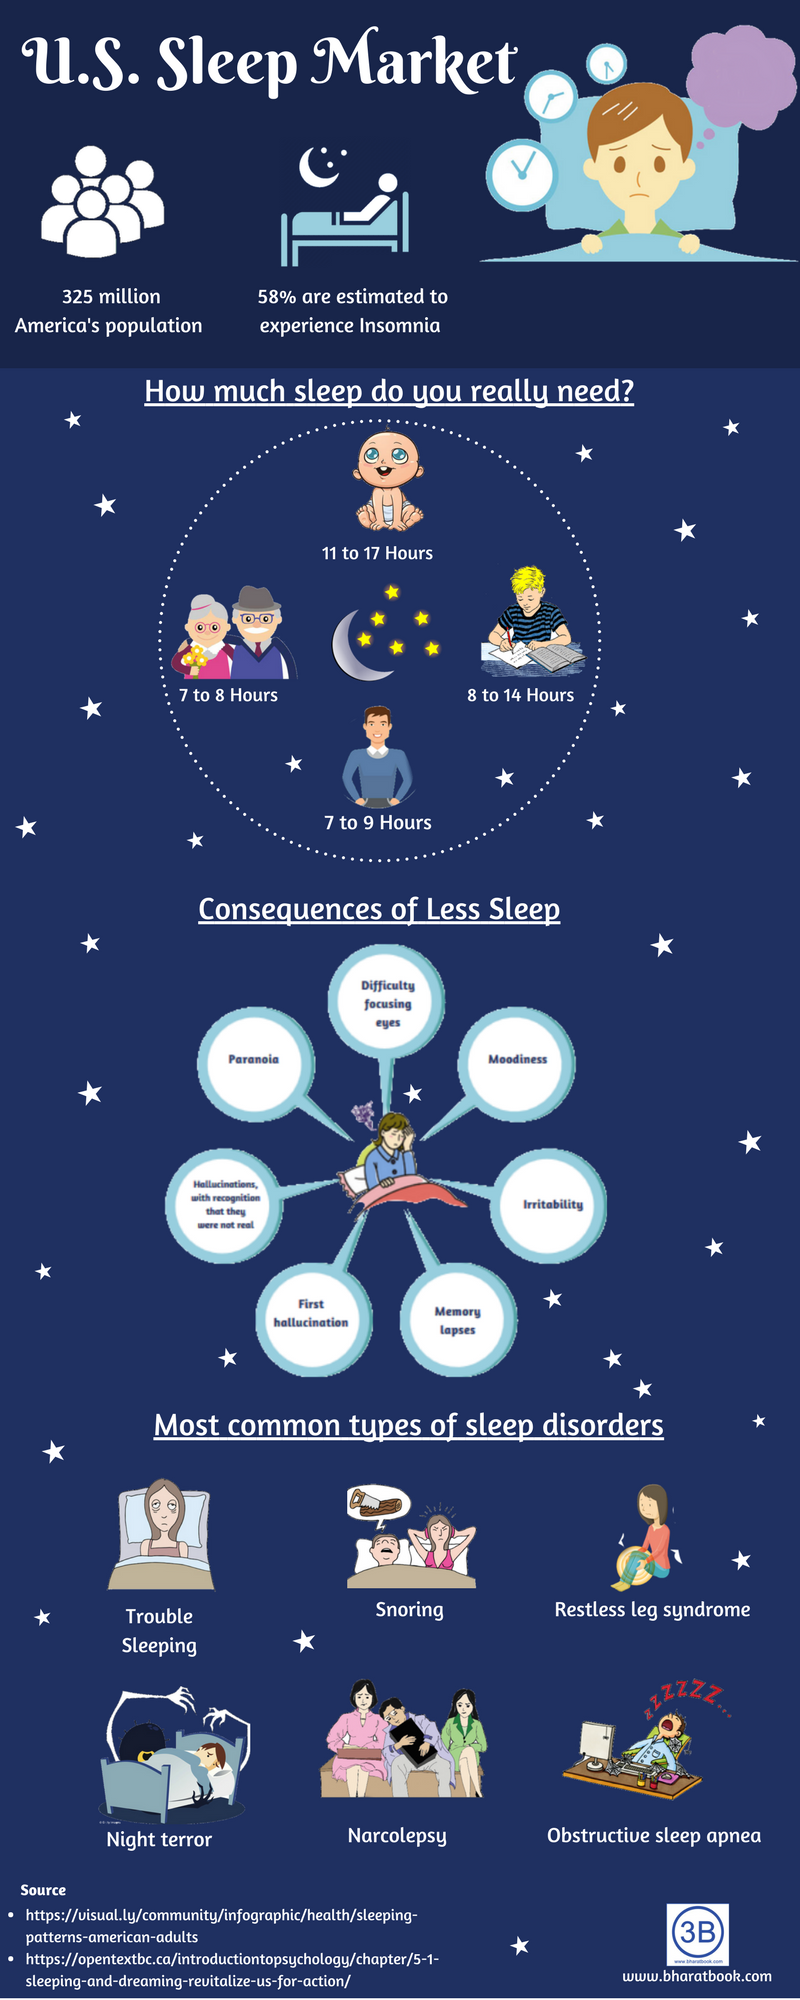 The US Sleep Market Research Report